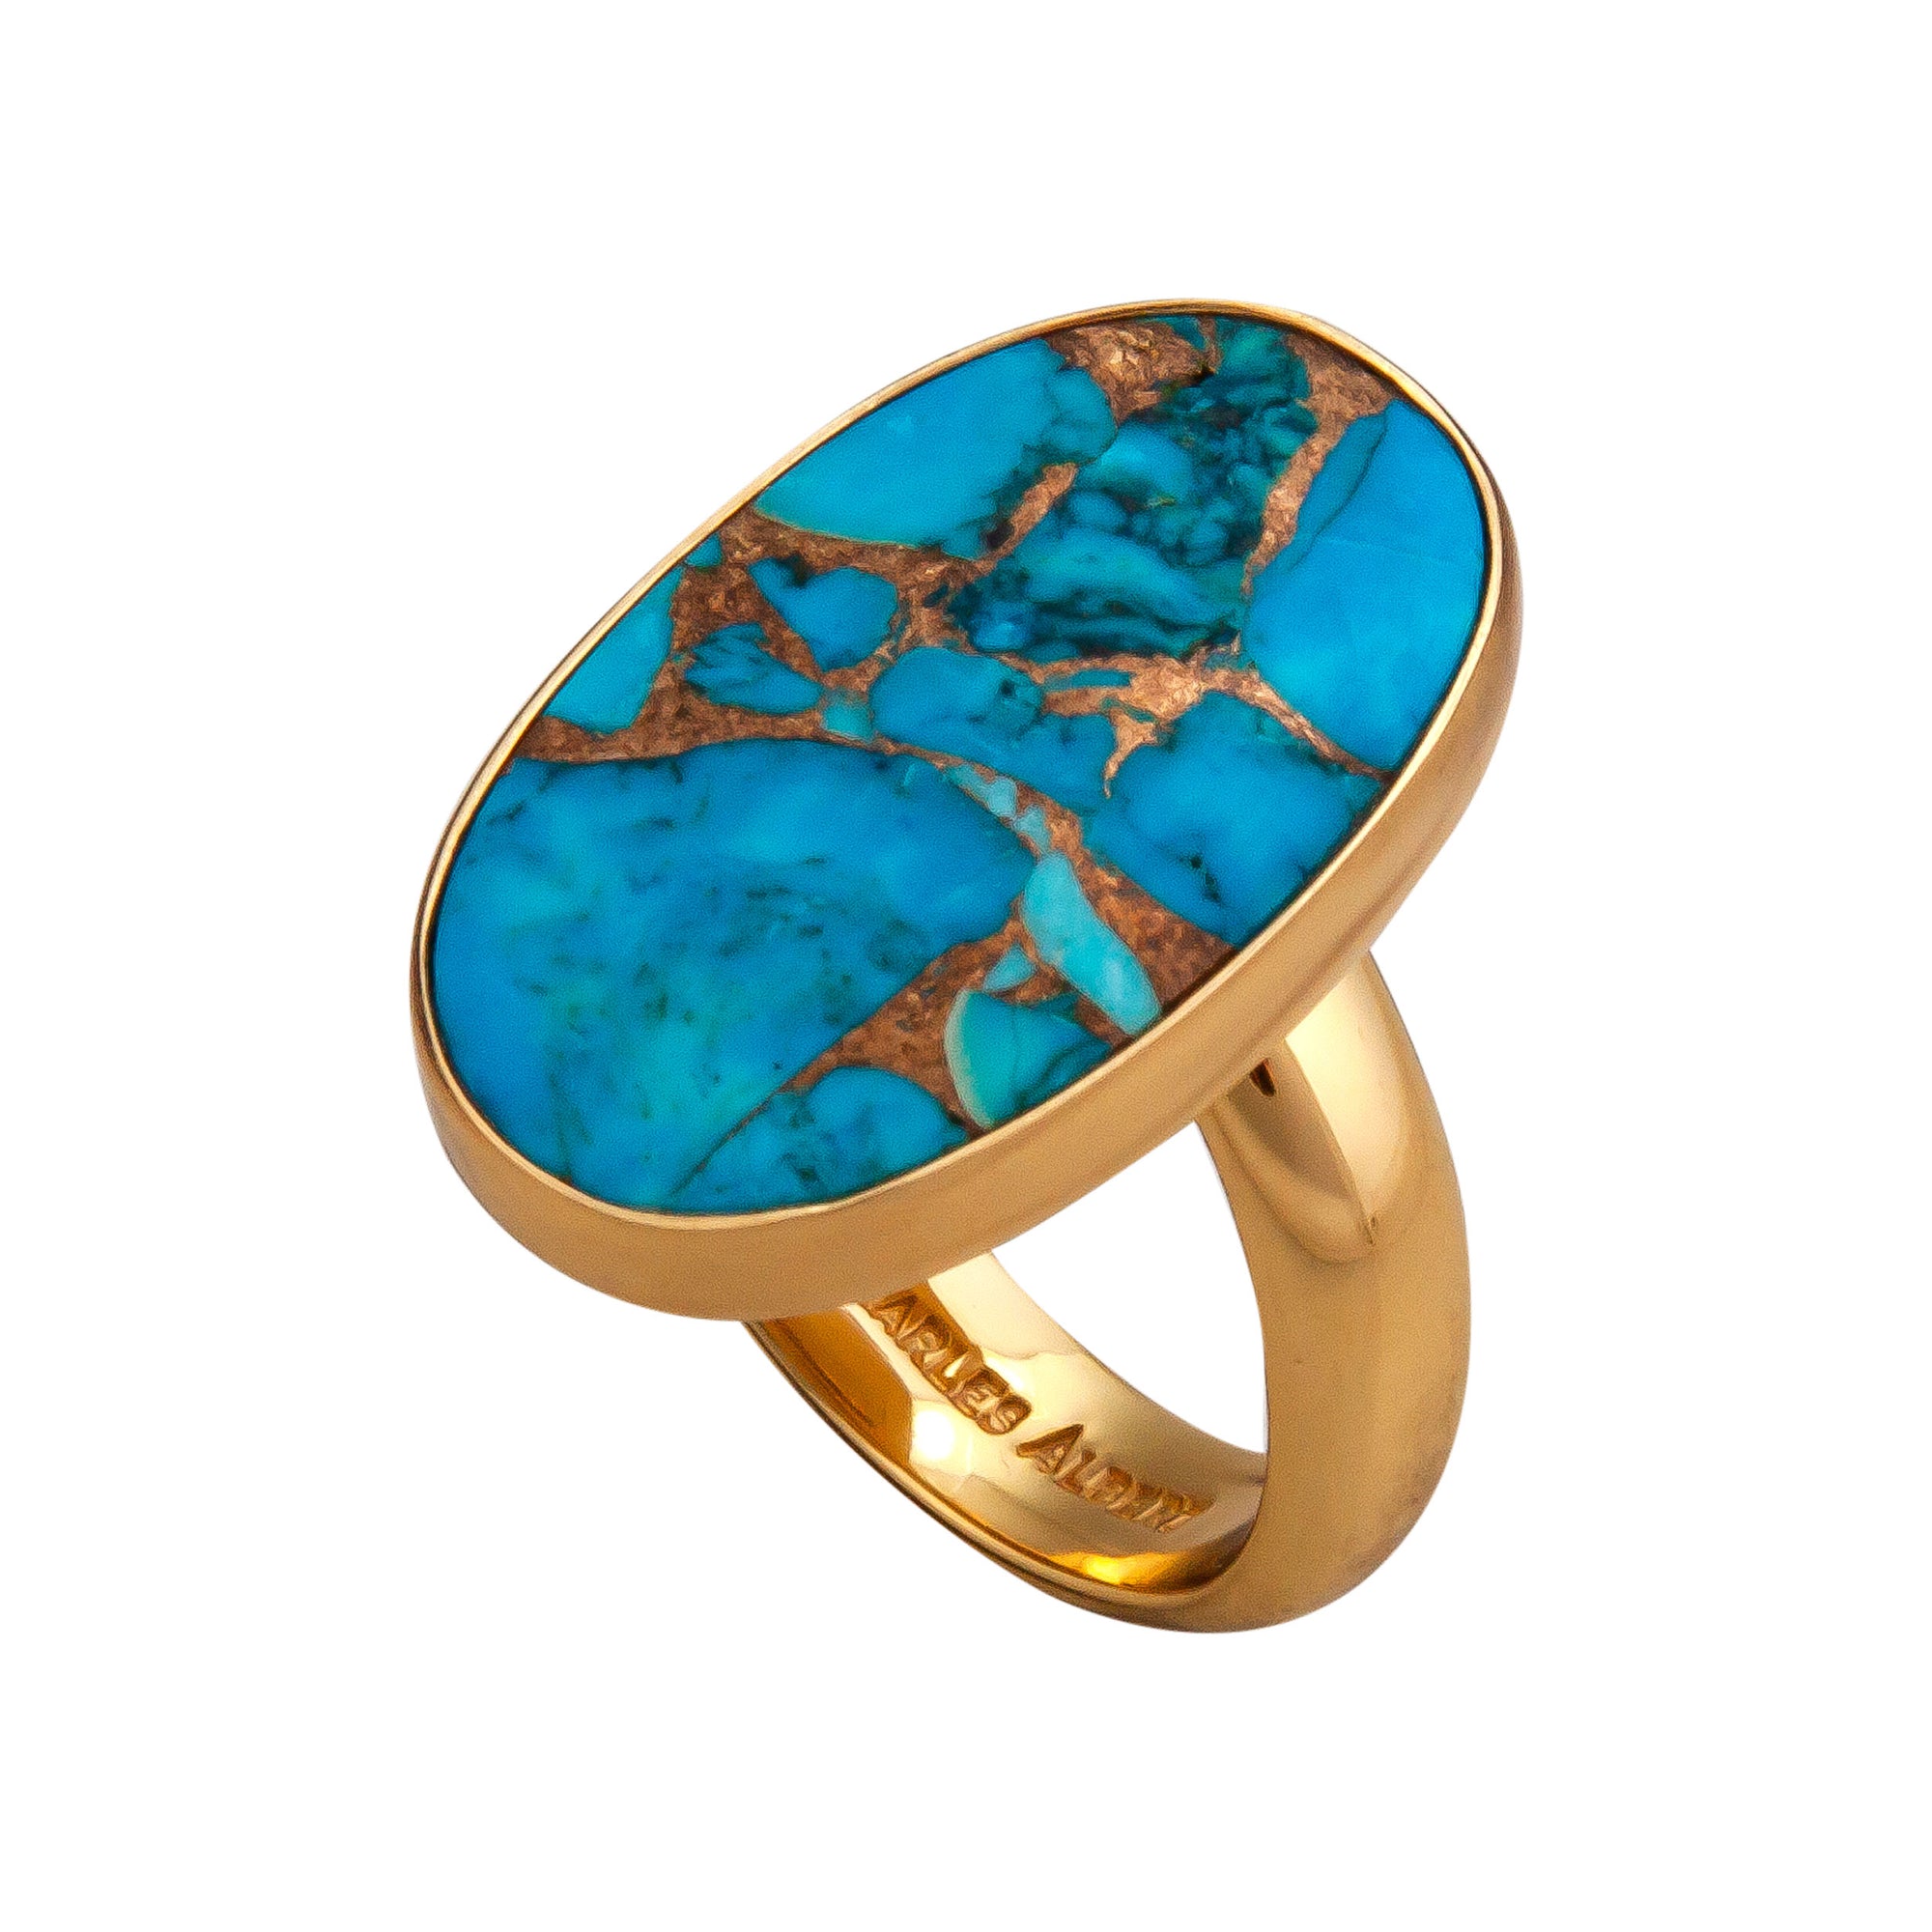 Alchemia Copper Infused Turquoise Ring | Charles Albert Jewelry